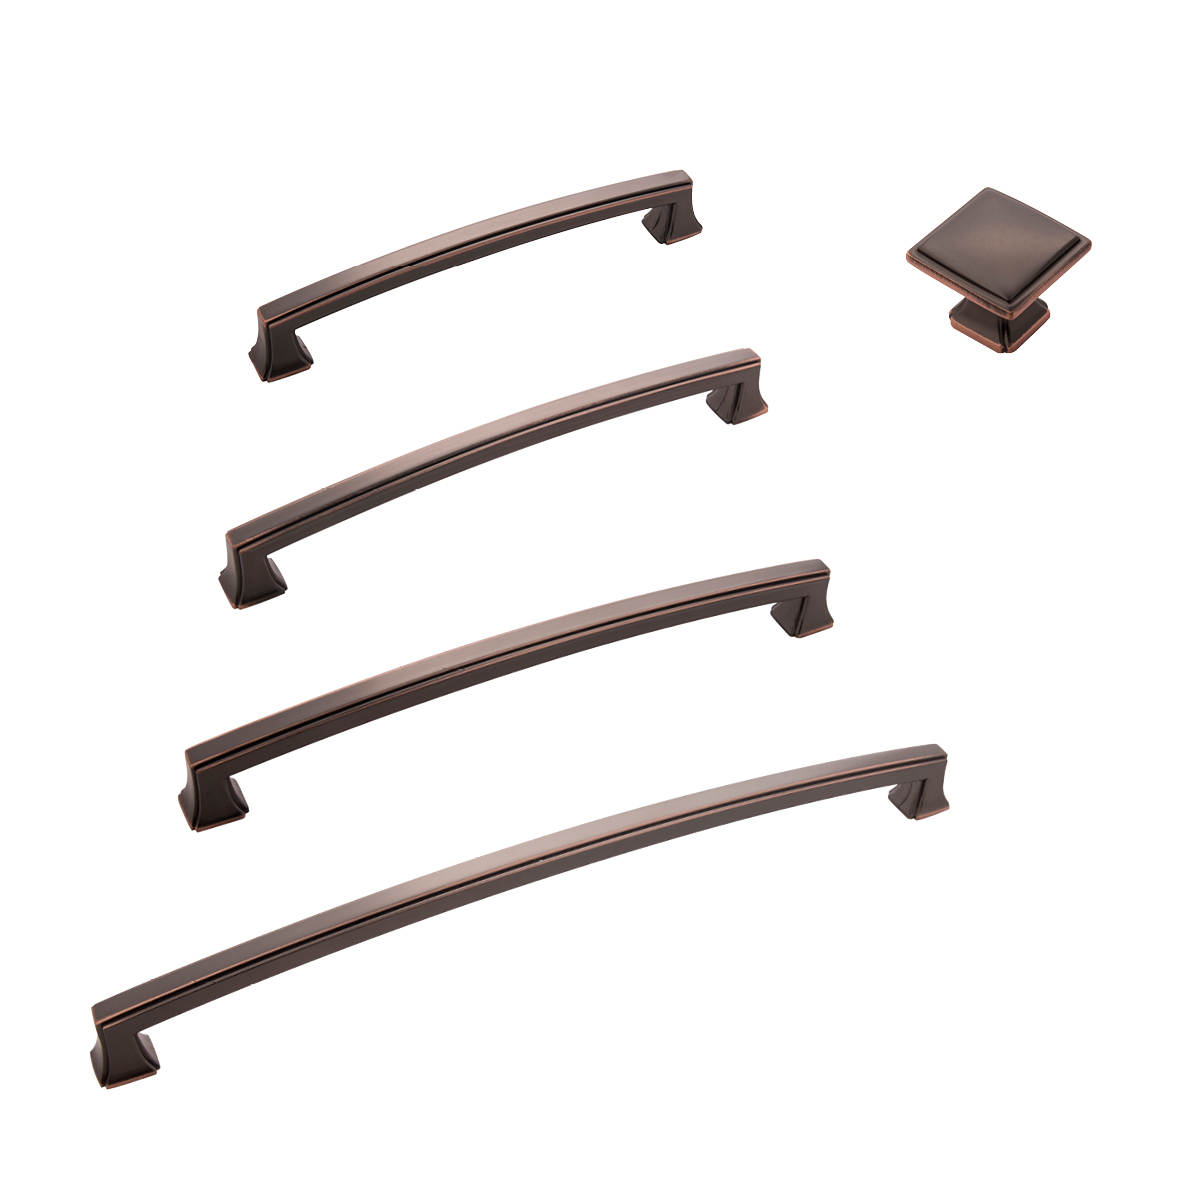 Oil-rubbed, bronze-highlighted drawer accessories